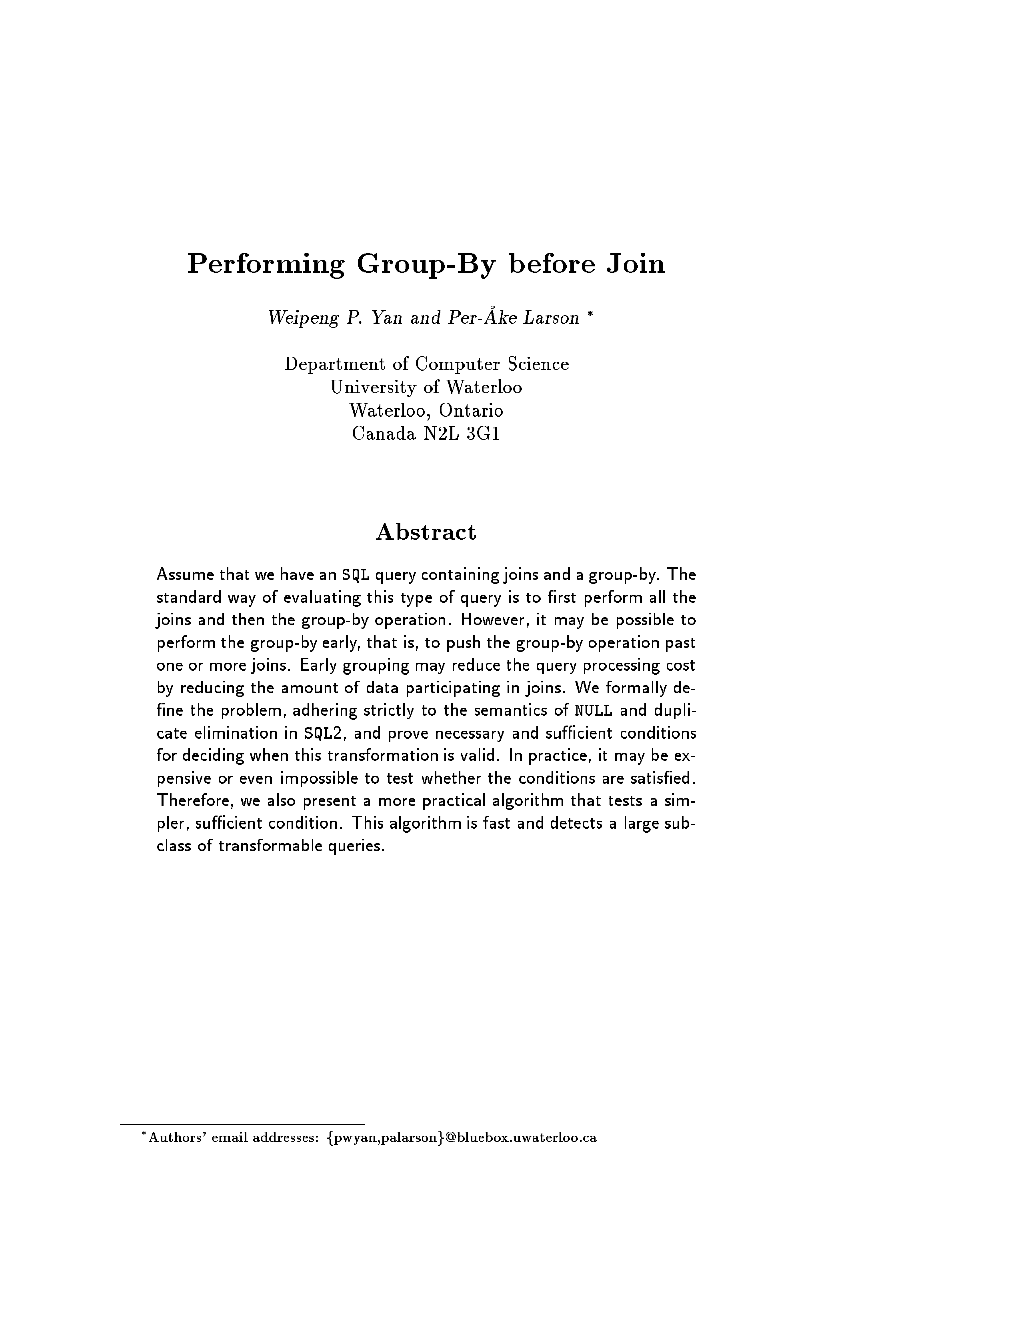 Performing Group-By Before Join (PDF)